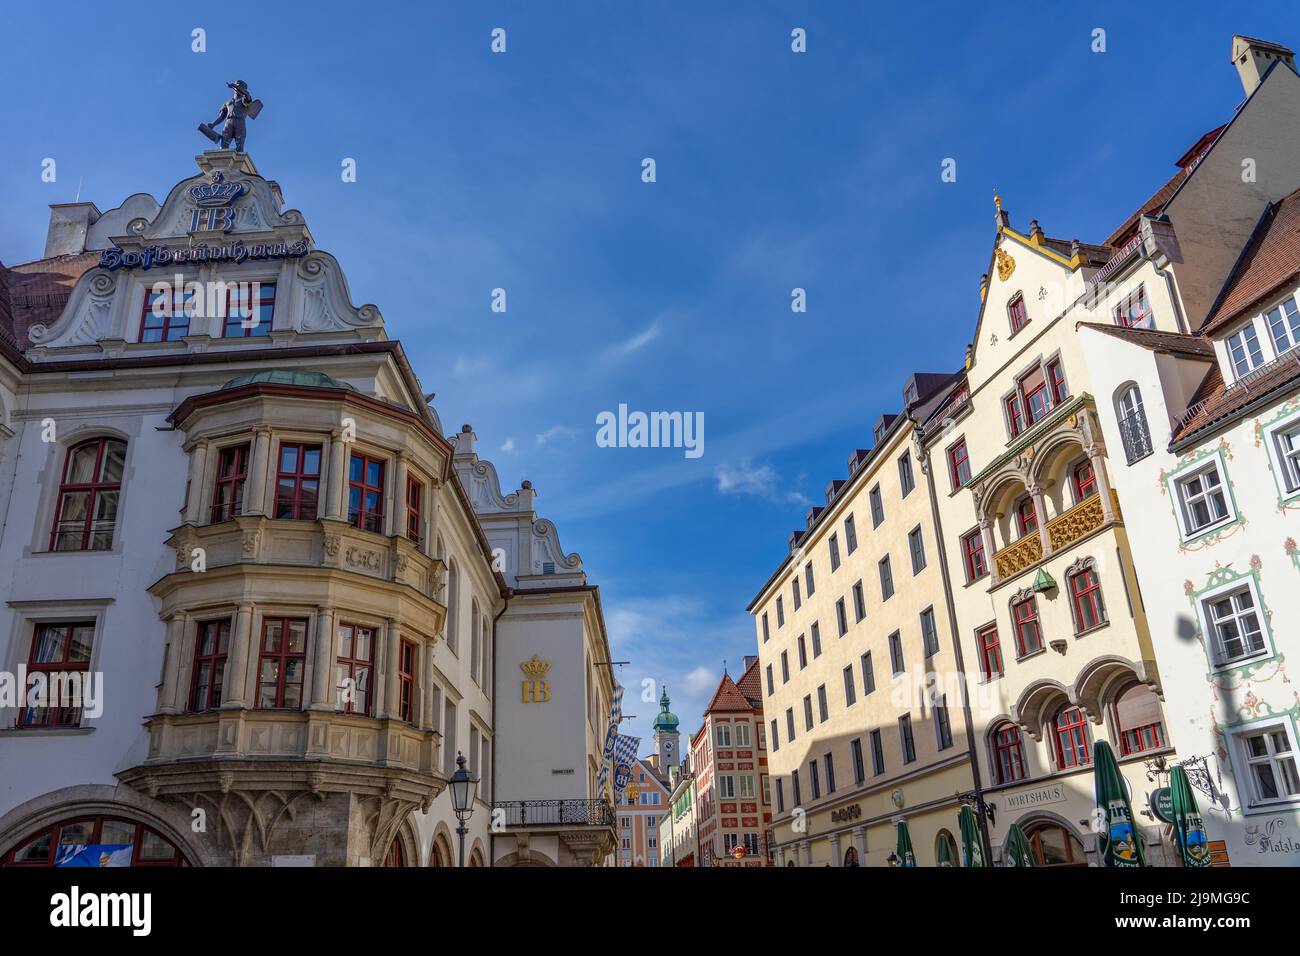 Munich, Germany - 04.08.2022: famous traditional hofbrauhaus bier hall building exterior Stock Photo